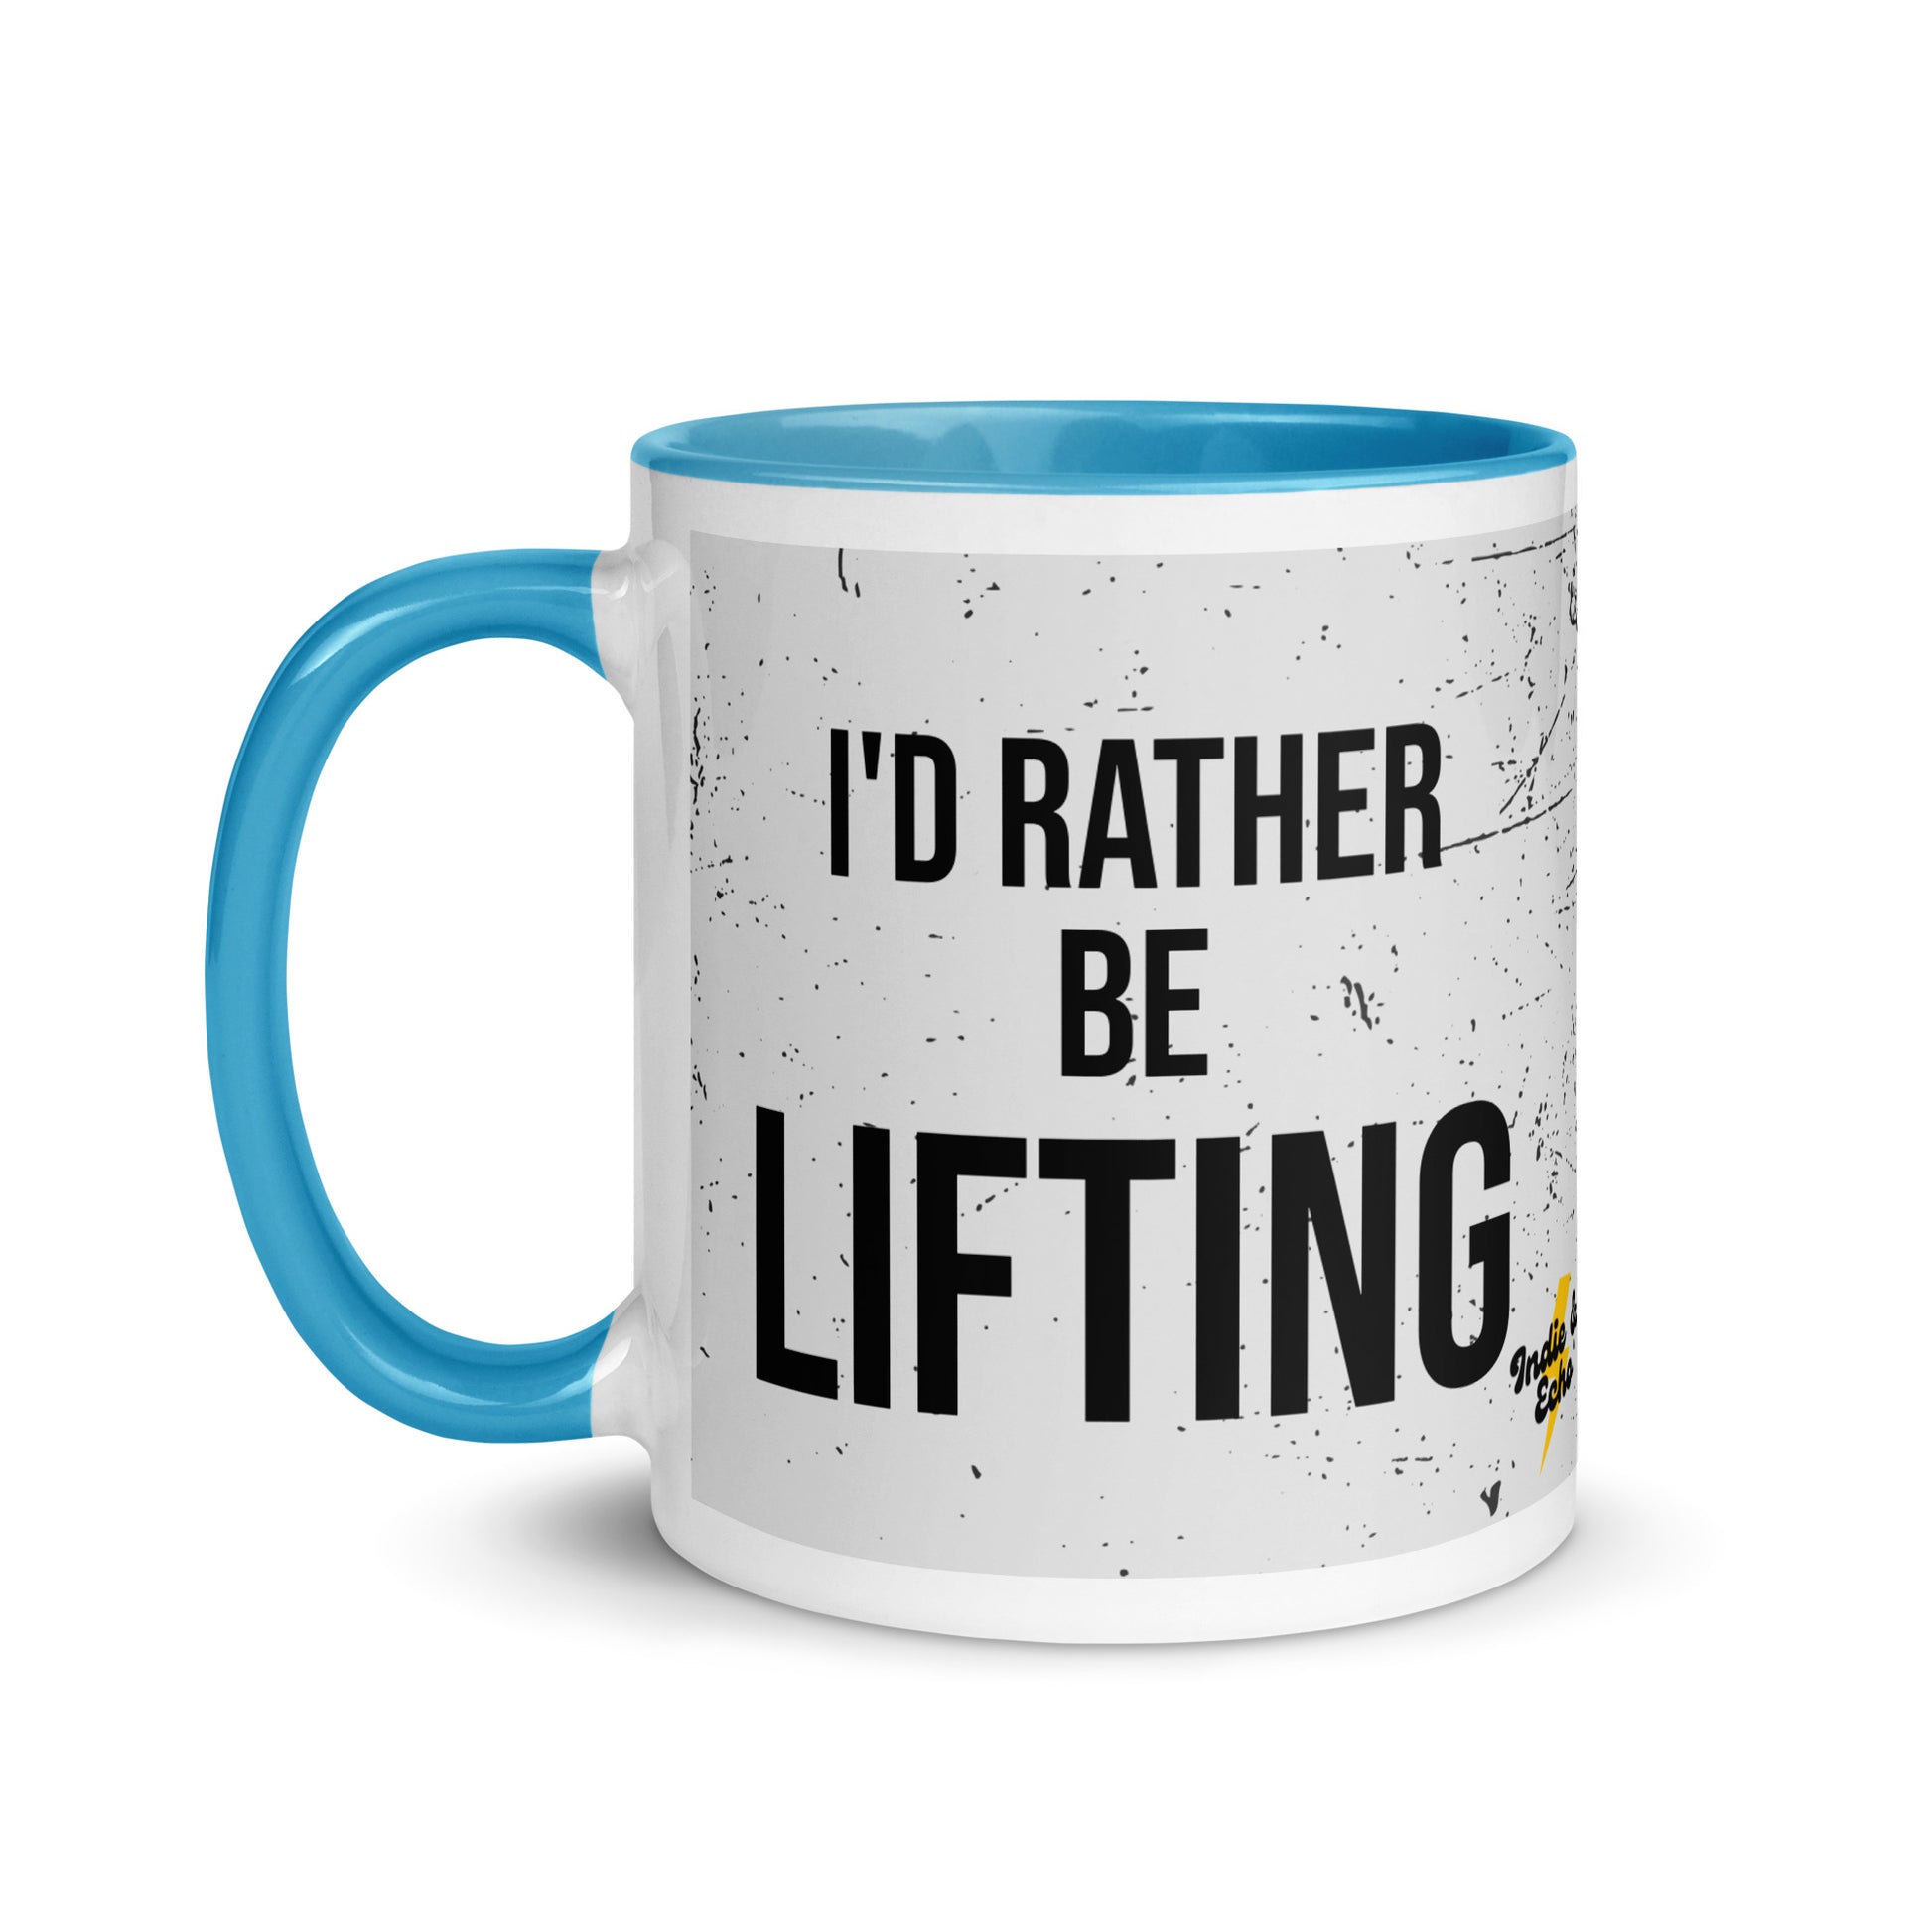 Blue handled mug with I'd rather be lifting written on it, across a grey splatter background. A gift for someone who loves the gym.